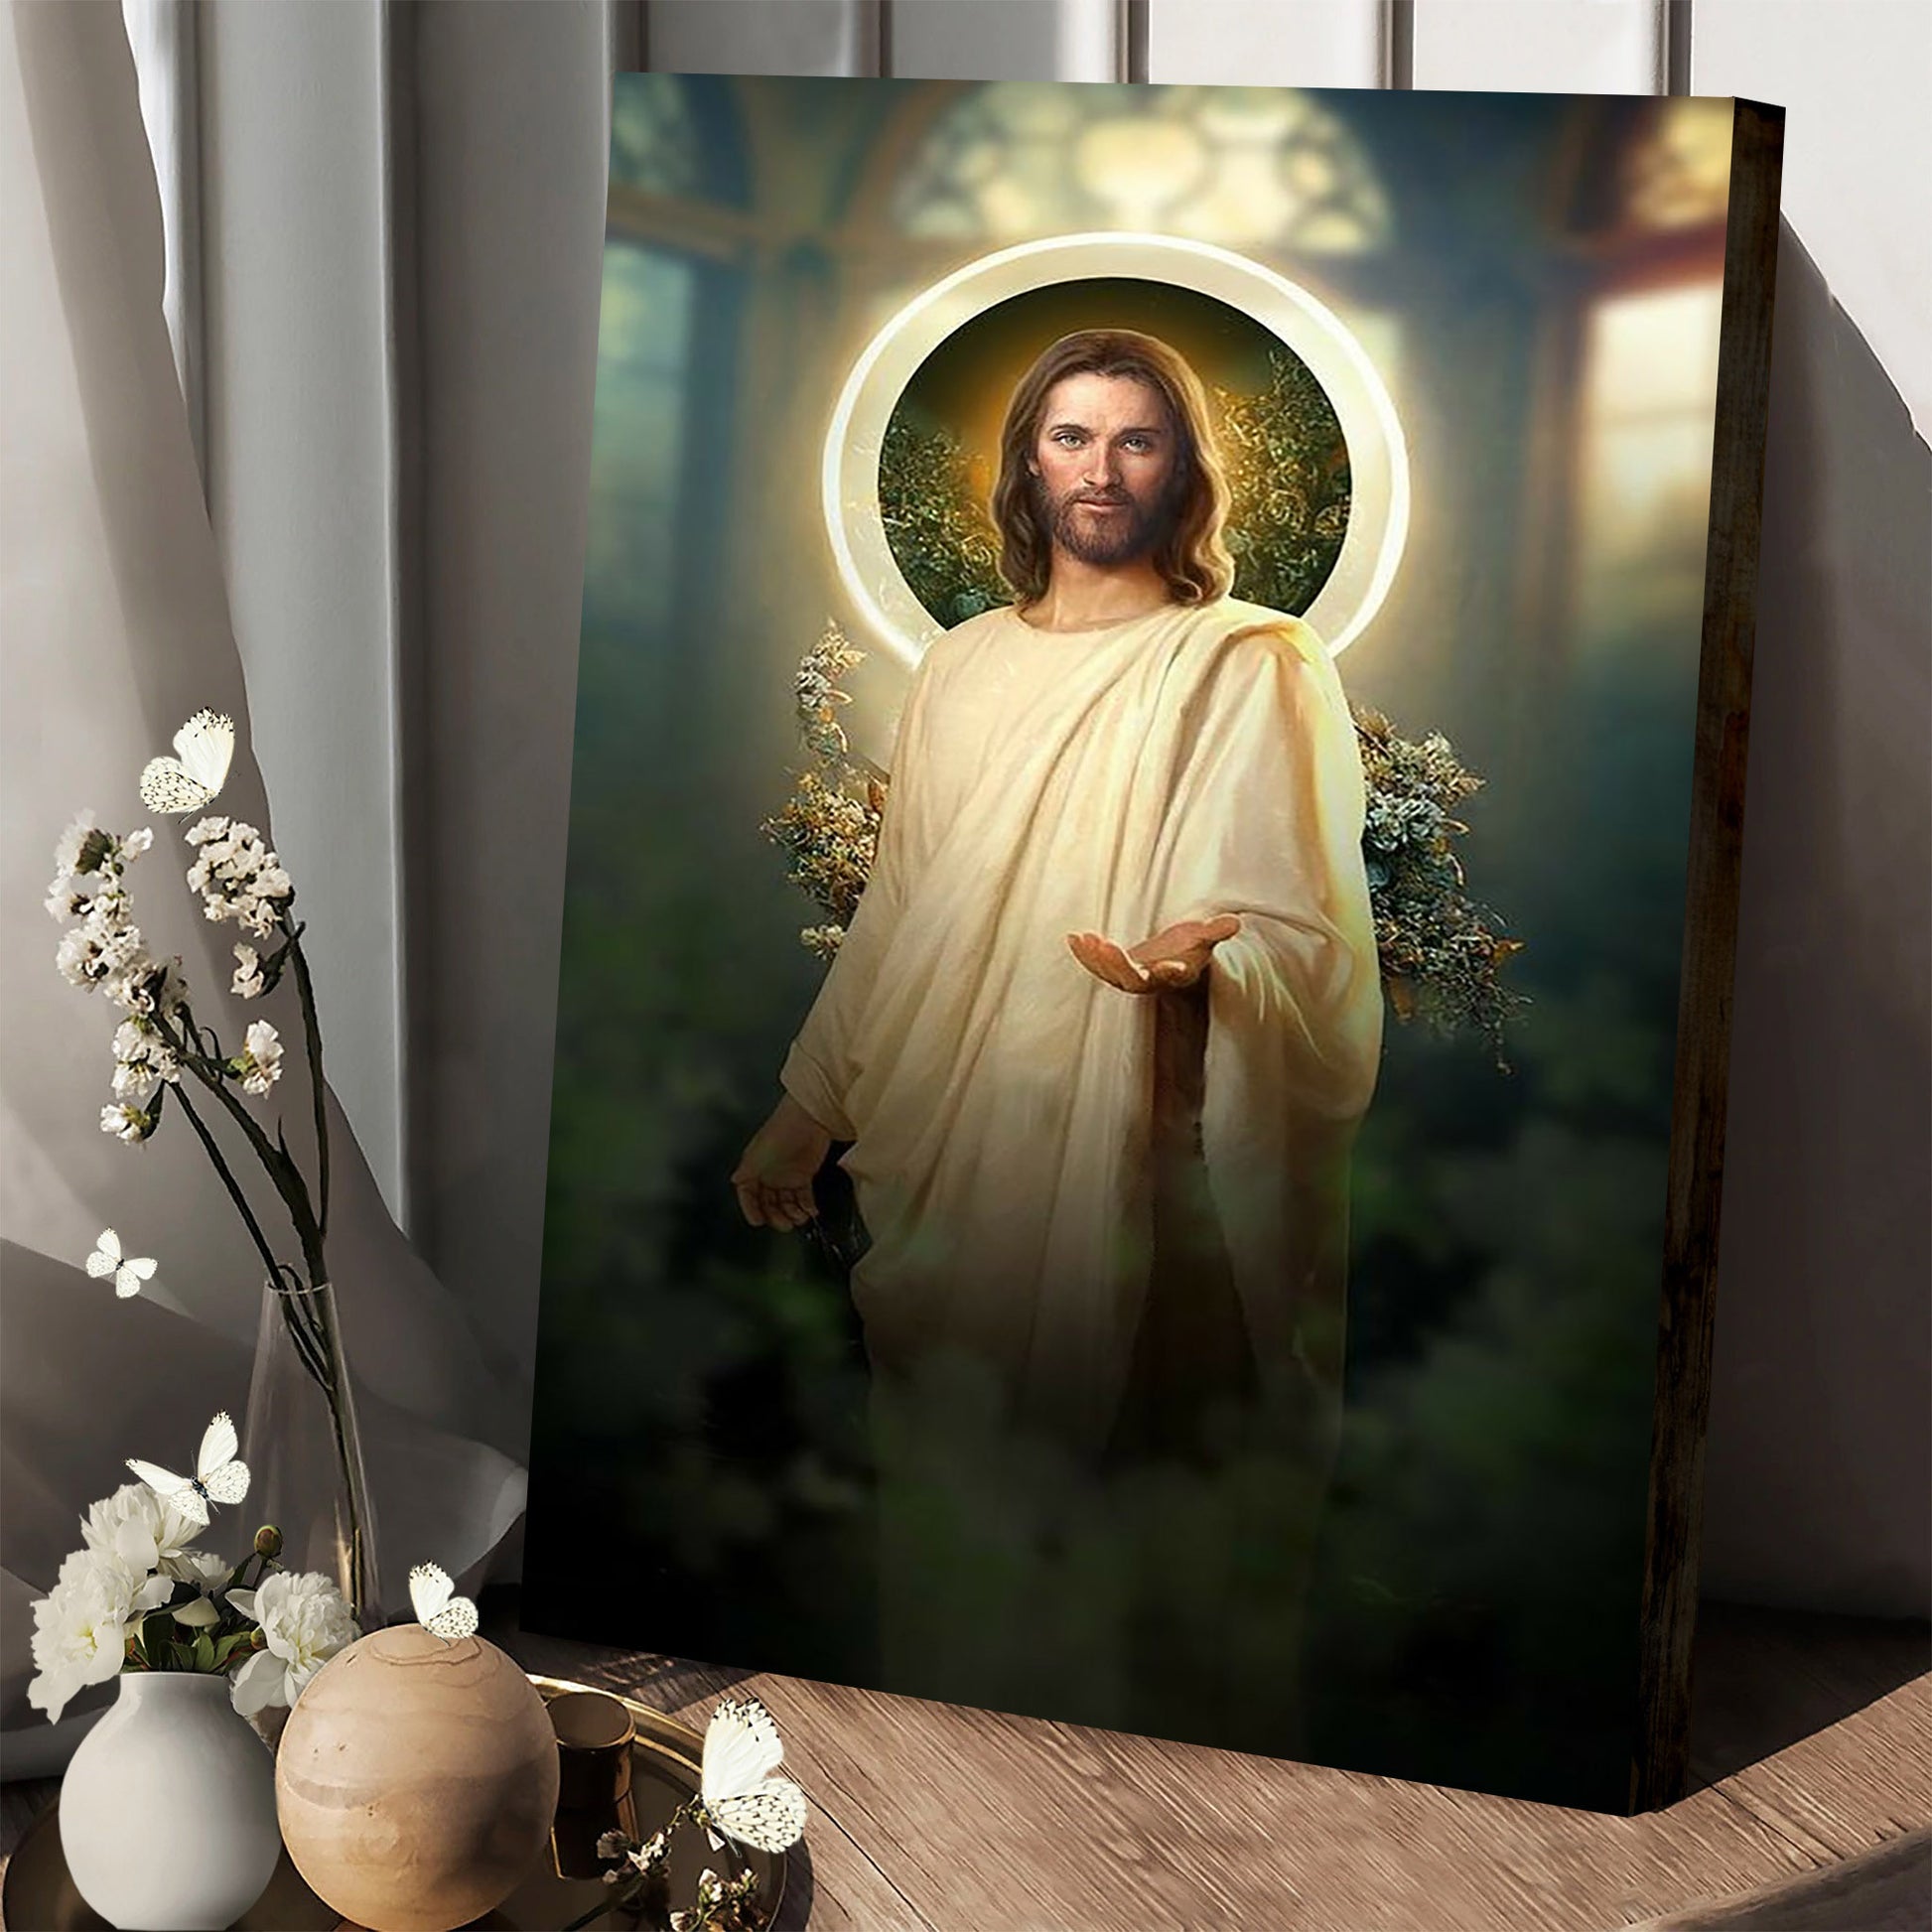 Jesus Stretched Out His Hand Canvas Prints - Jesus Christ Art - Christian Canvas Wall Decor